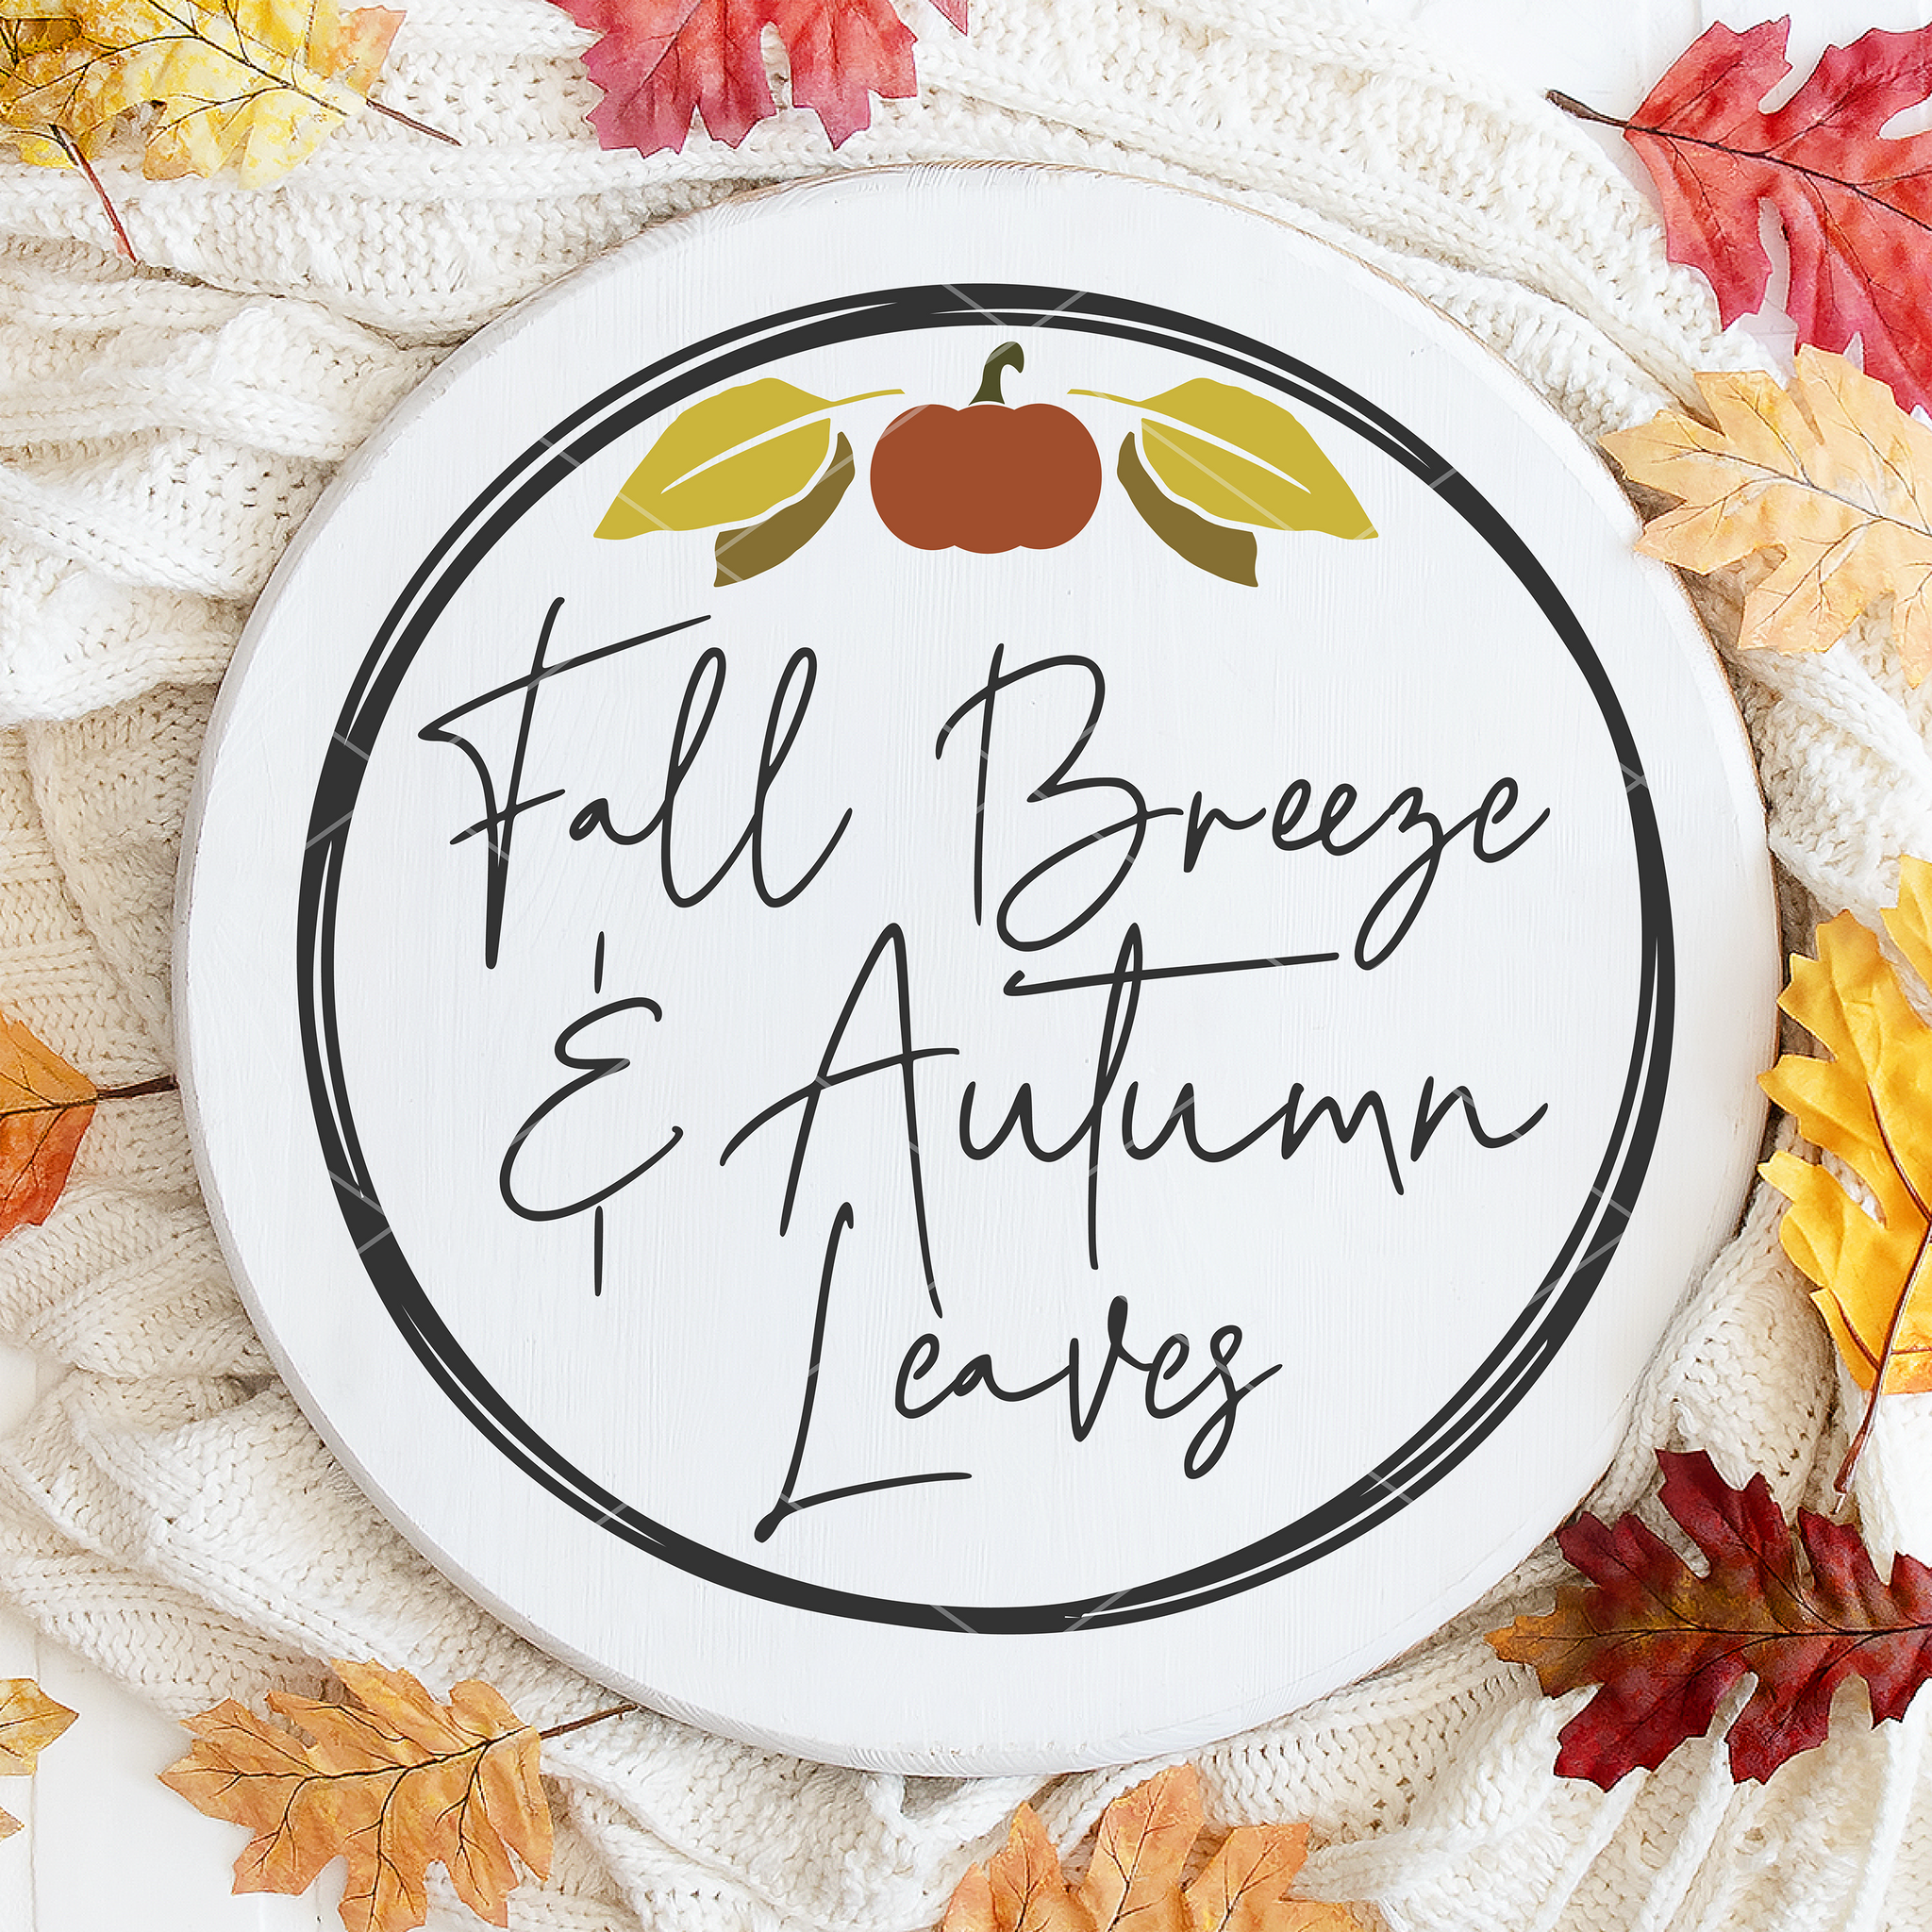 Fall Breeze and Autumn Leaves SVG File | Cricut & Silhouette Files - Commercial Use SVG Files for Cricut & Silhouette